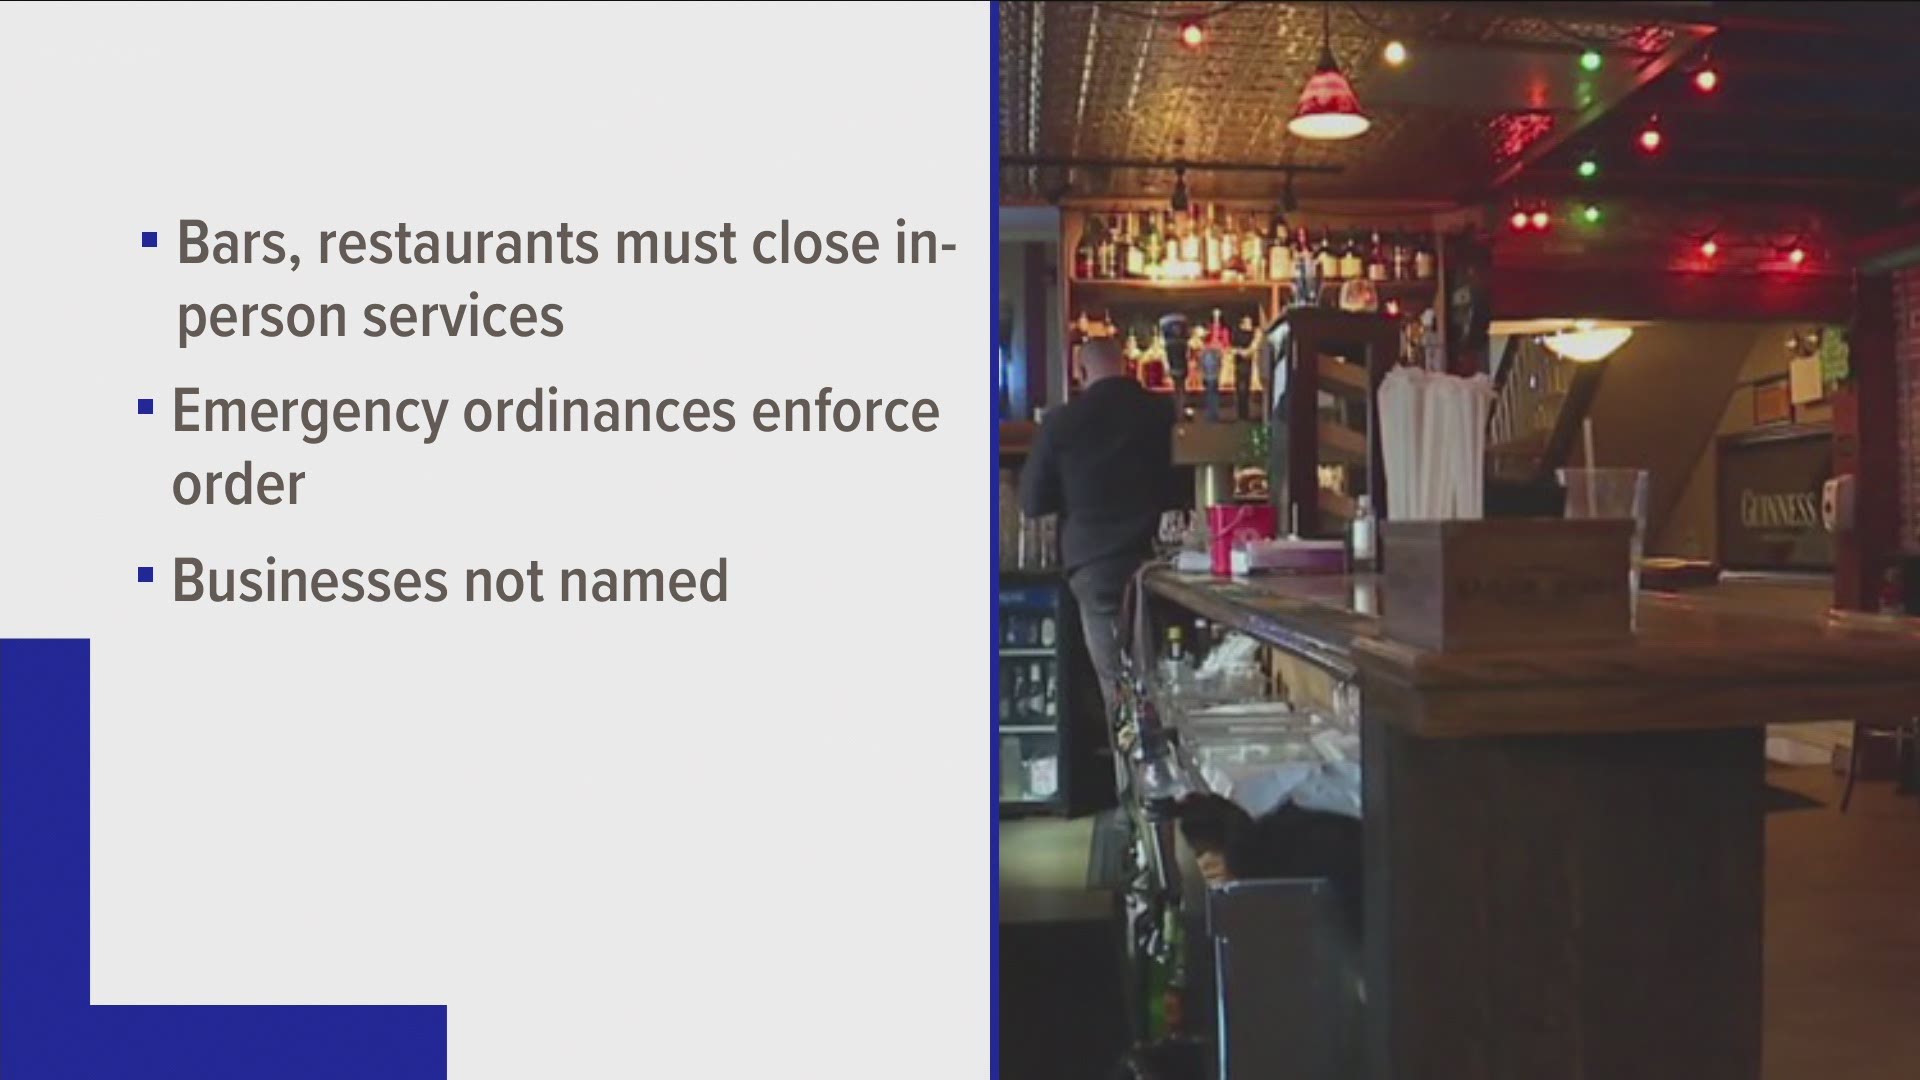 A Board of Health order requires bars and restaurants to close in-person service by 11 p.m.